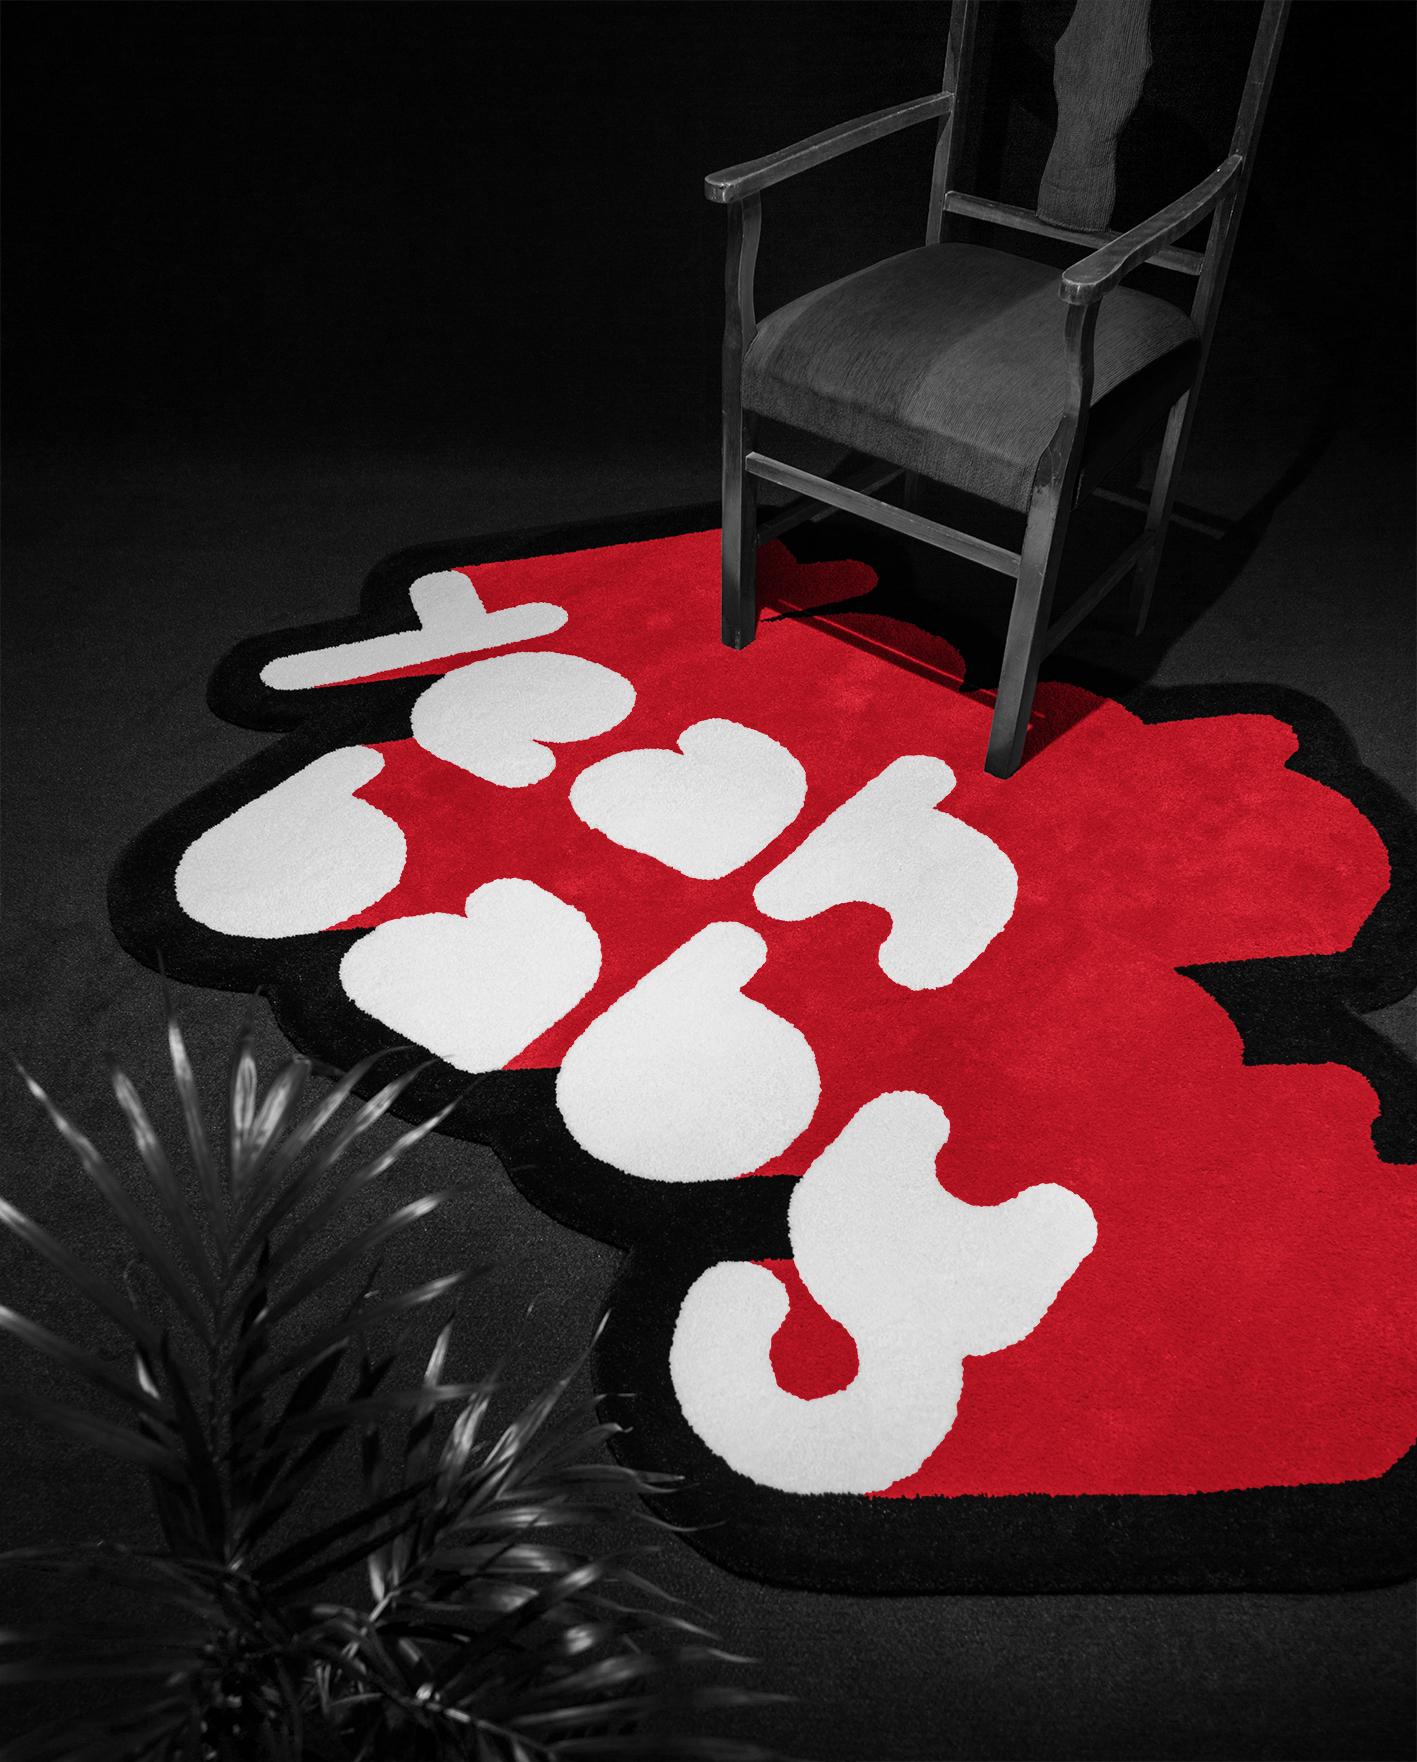 Machine-Made Playful 3 Colors Yeah Baby Rug from Graffiti Collection by Paulo Kobylka, Large For Sale